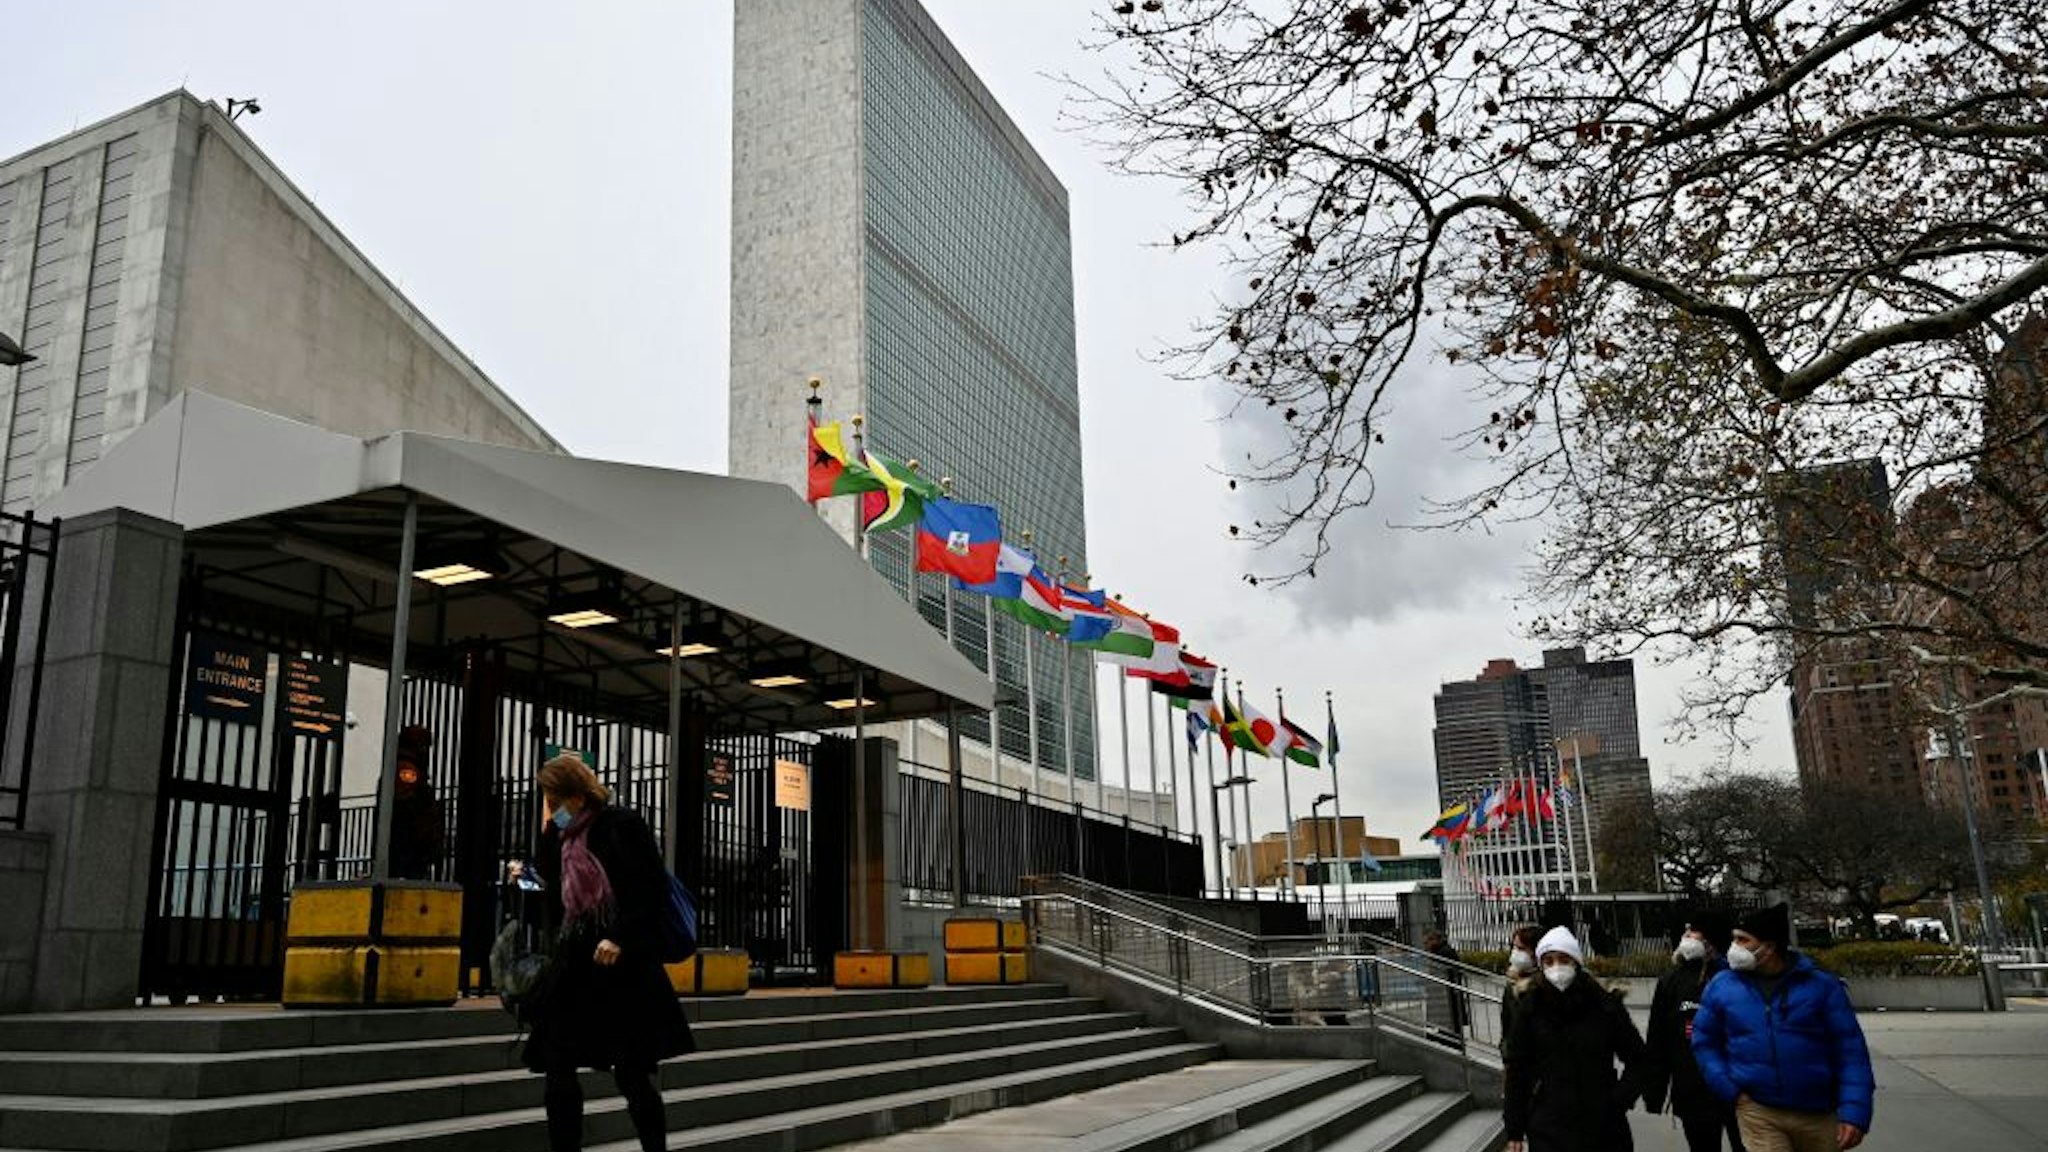 People walk in front of the United Nations Headquarters building in Manhattan, New York city, on December 8, 2021. (Photo by Daniel SLIM / AFP) (Photo by DANIEL SLIM/AFP via Getty Images)